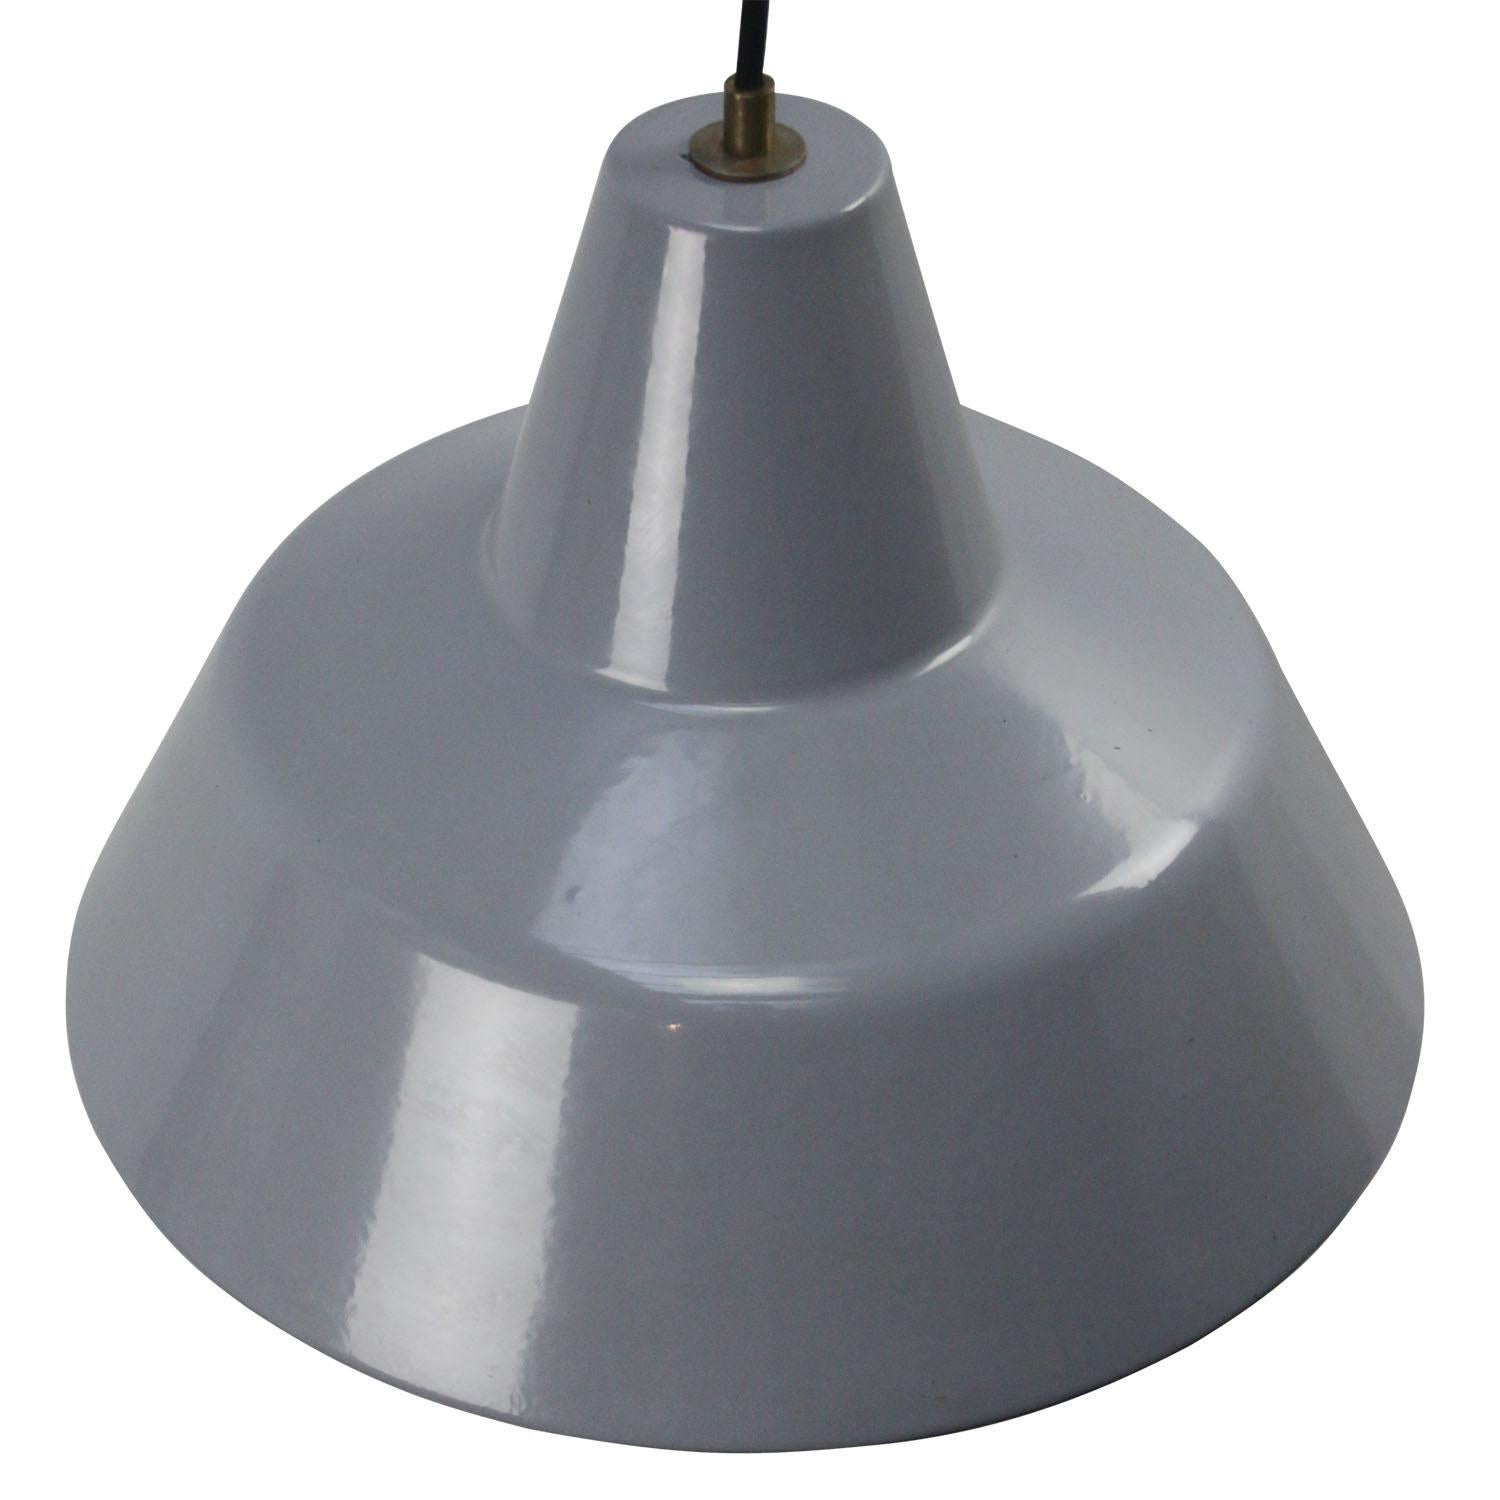 Dutch industrial hanging lamp by Philips
Grey enamel white interior

Weight: 2.00 kg / 4.4 lb

Priced per individual item. All lamps have been made suitable by international standards for incandescent light bulbs, energy-efficient and LED